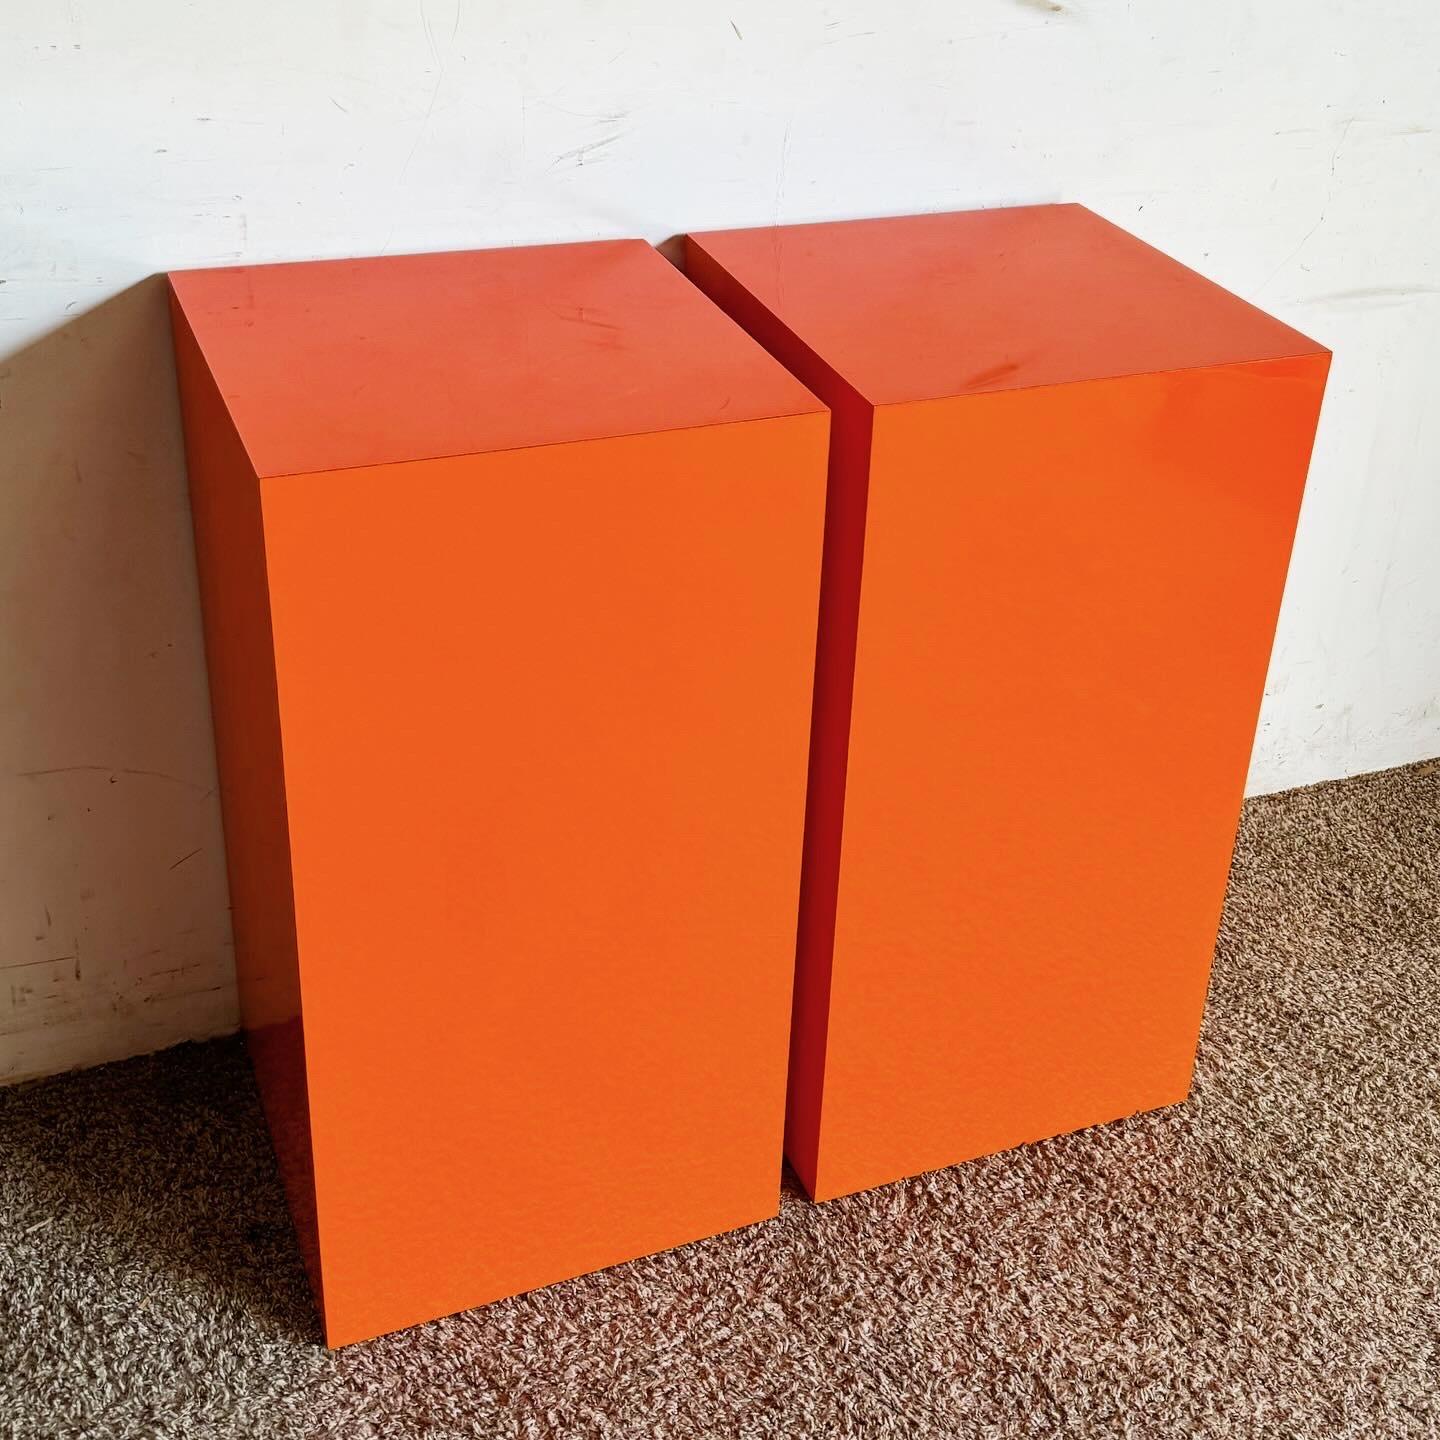 Elevate your decor with Vibrant Orange Display Pedestals, blending vibrant aesthetics with sleek, contemporary design for standout displays.
Vintage pieces may have age-related wear. Review photos carefully, ask questions, request more images.